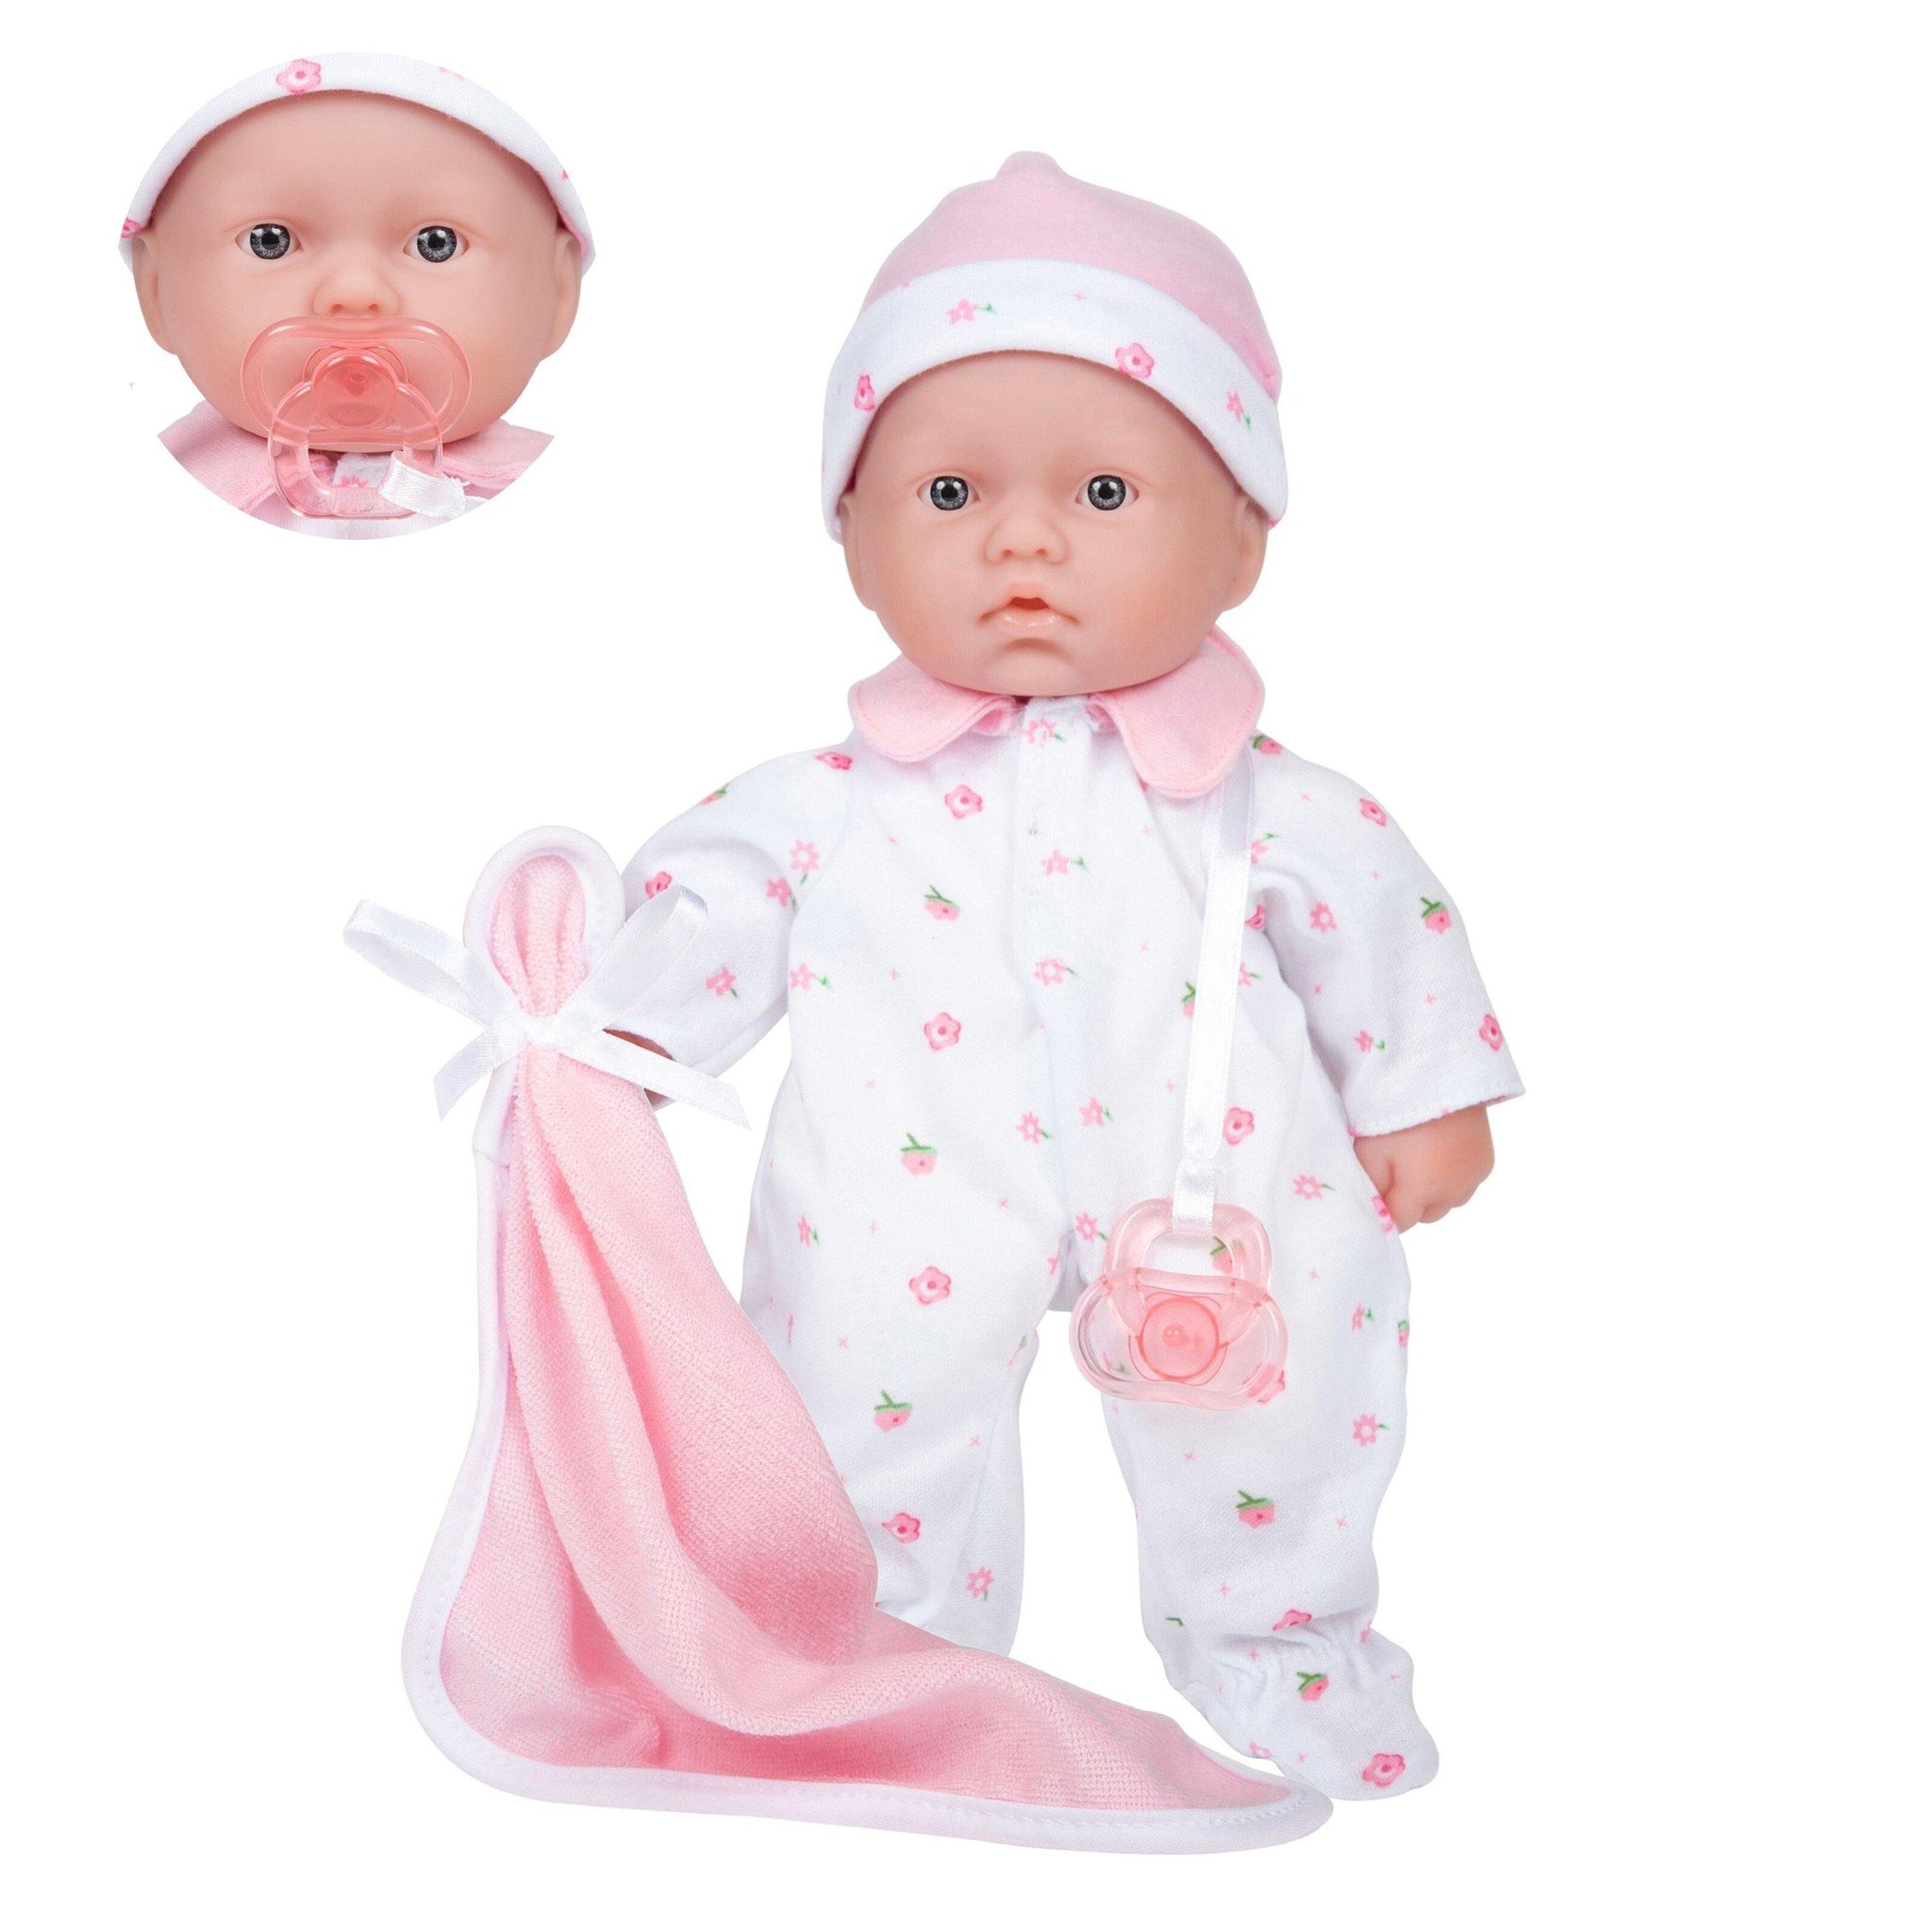 JC Toys, La Baby 11 inch Soft Body Baby Doll in Pink With Realistic Features - JC Toys Group Inc.